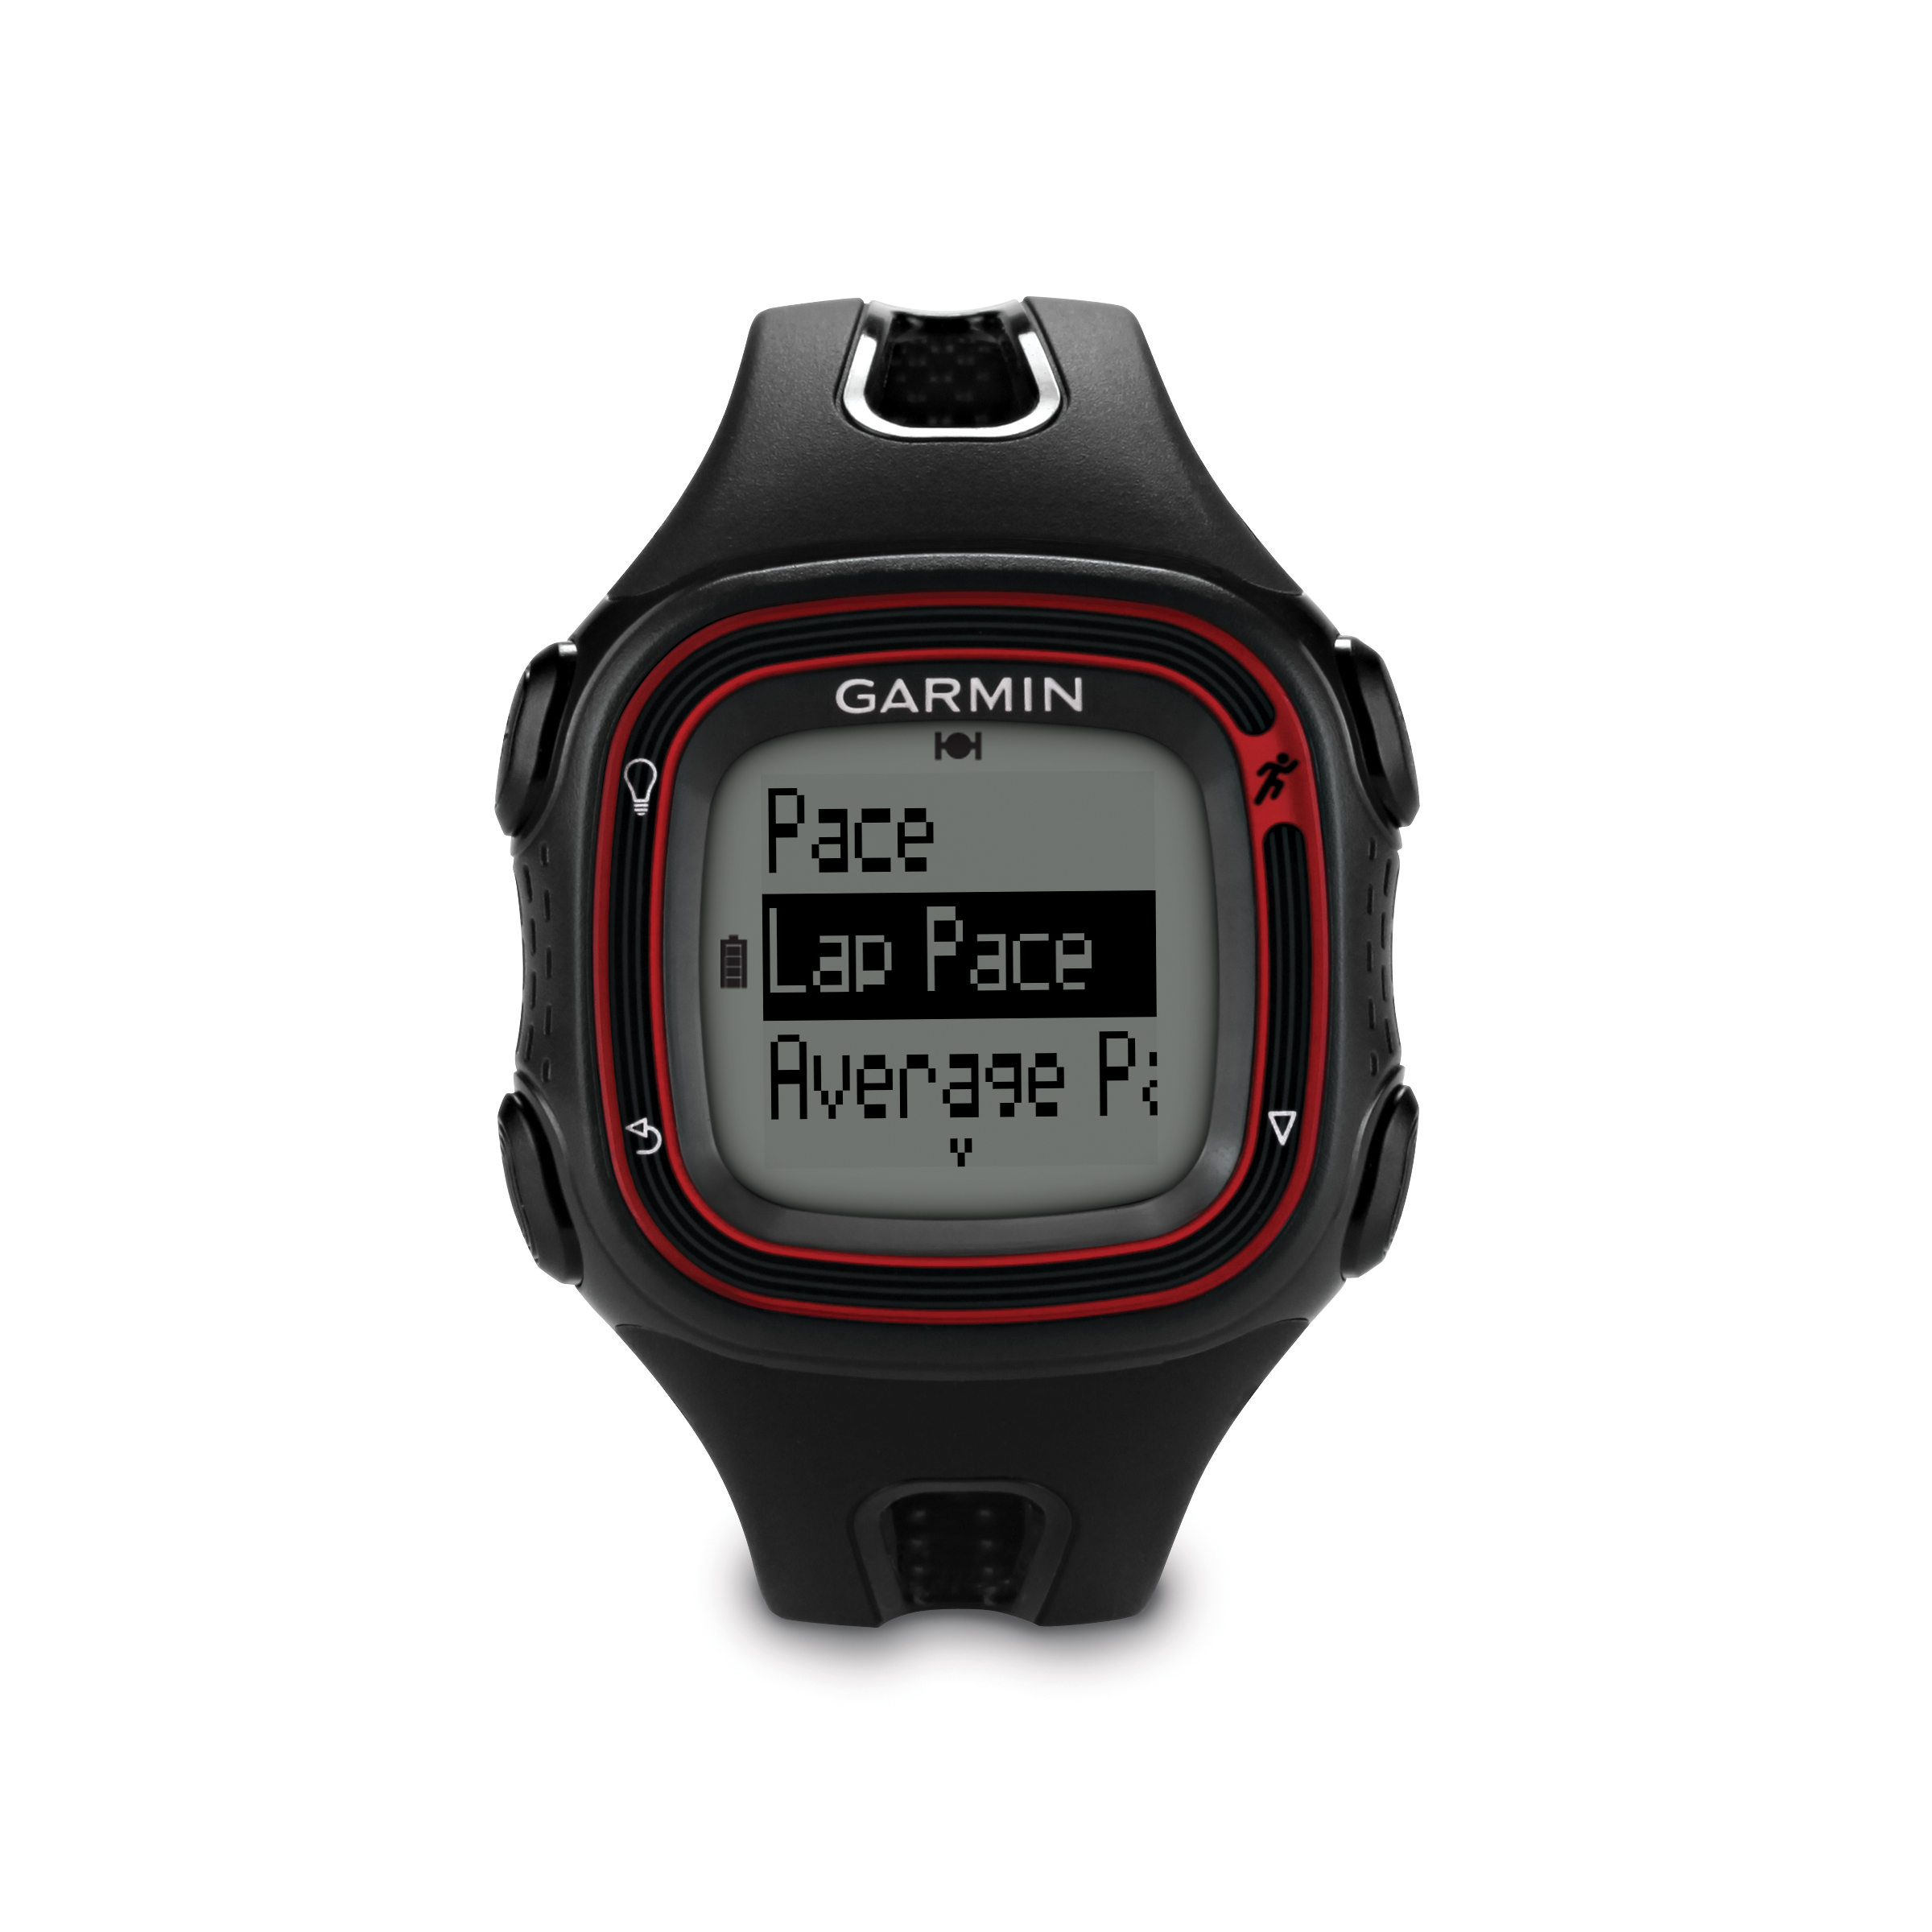 Garmin Forerunner 10 Gps Watch Offers New Colors At Hrwc